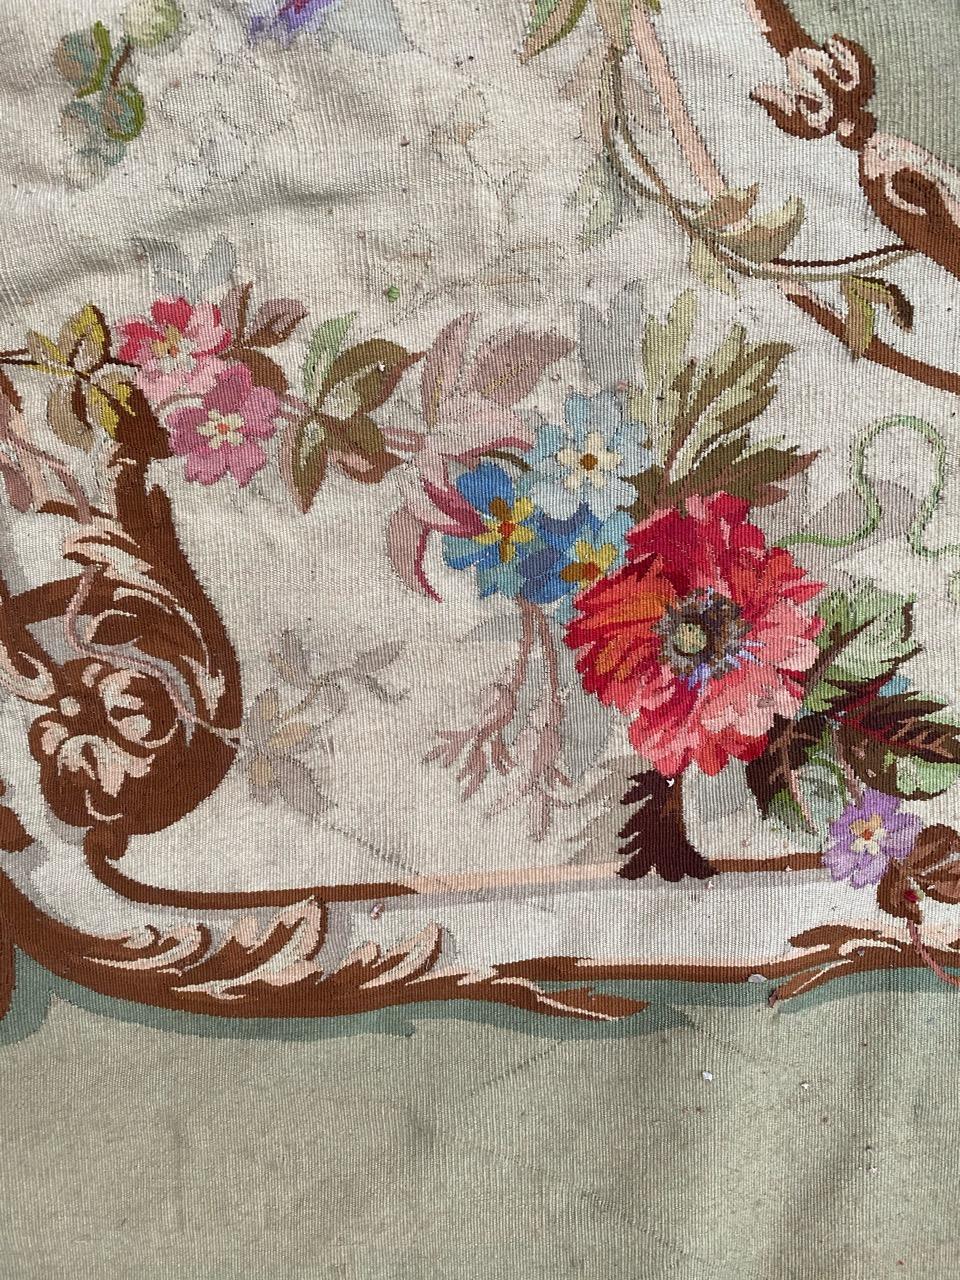 Wool Wonderful French Valance Aubusson Tapestry